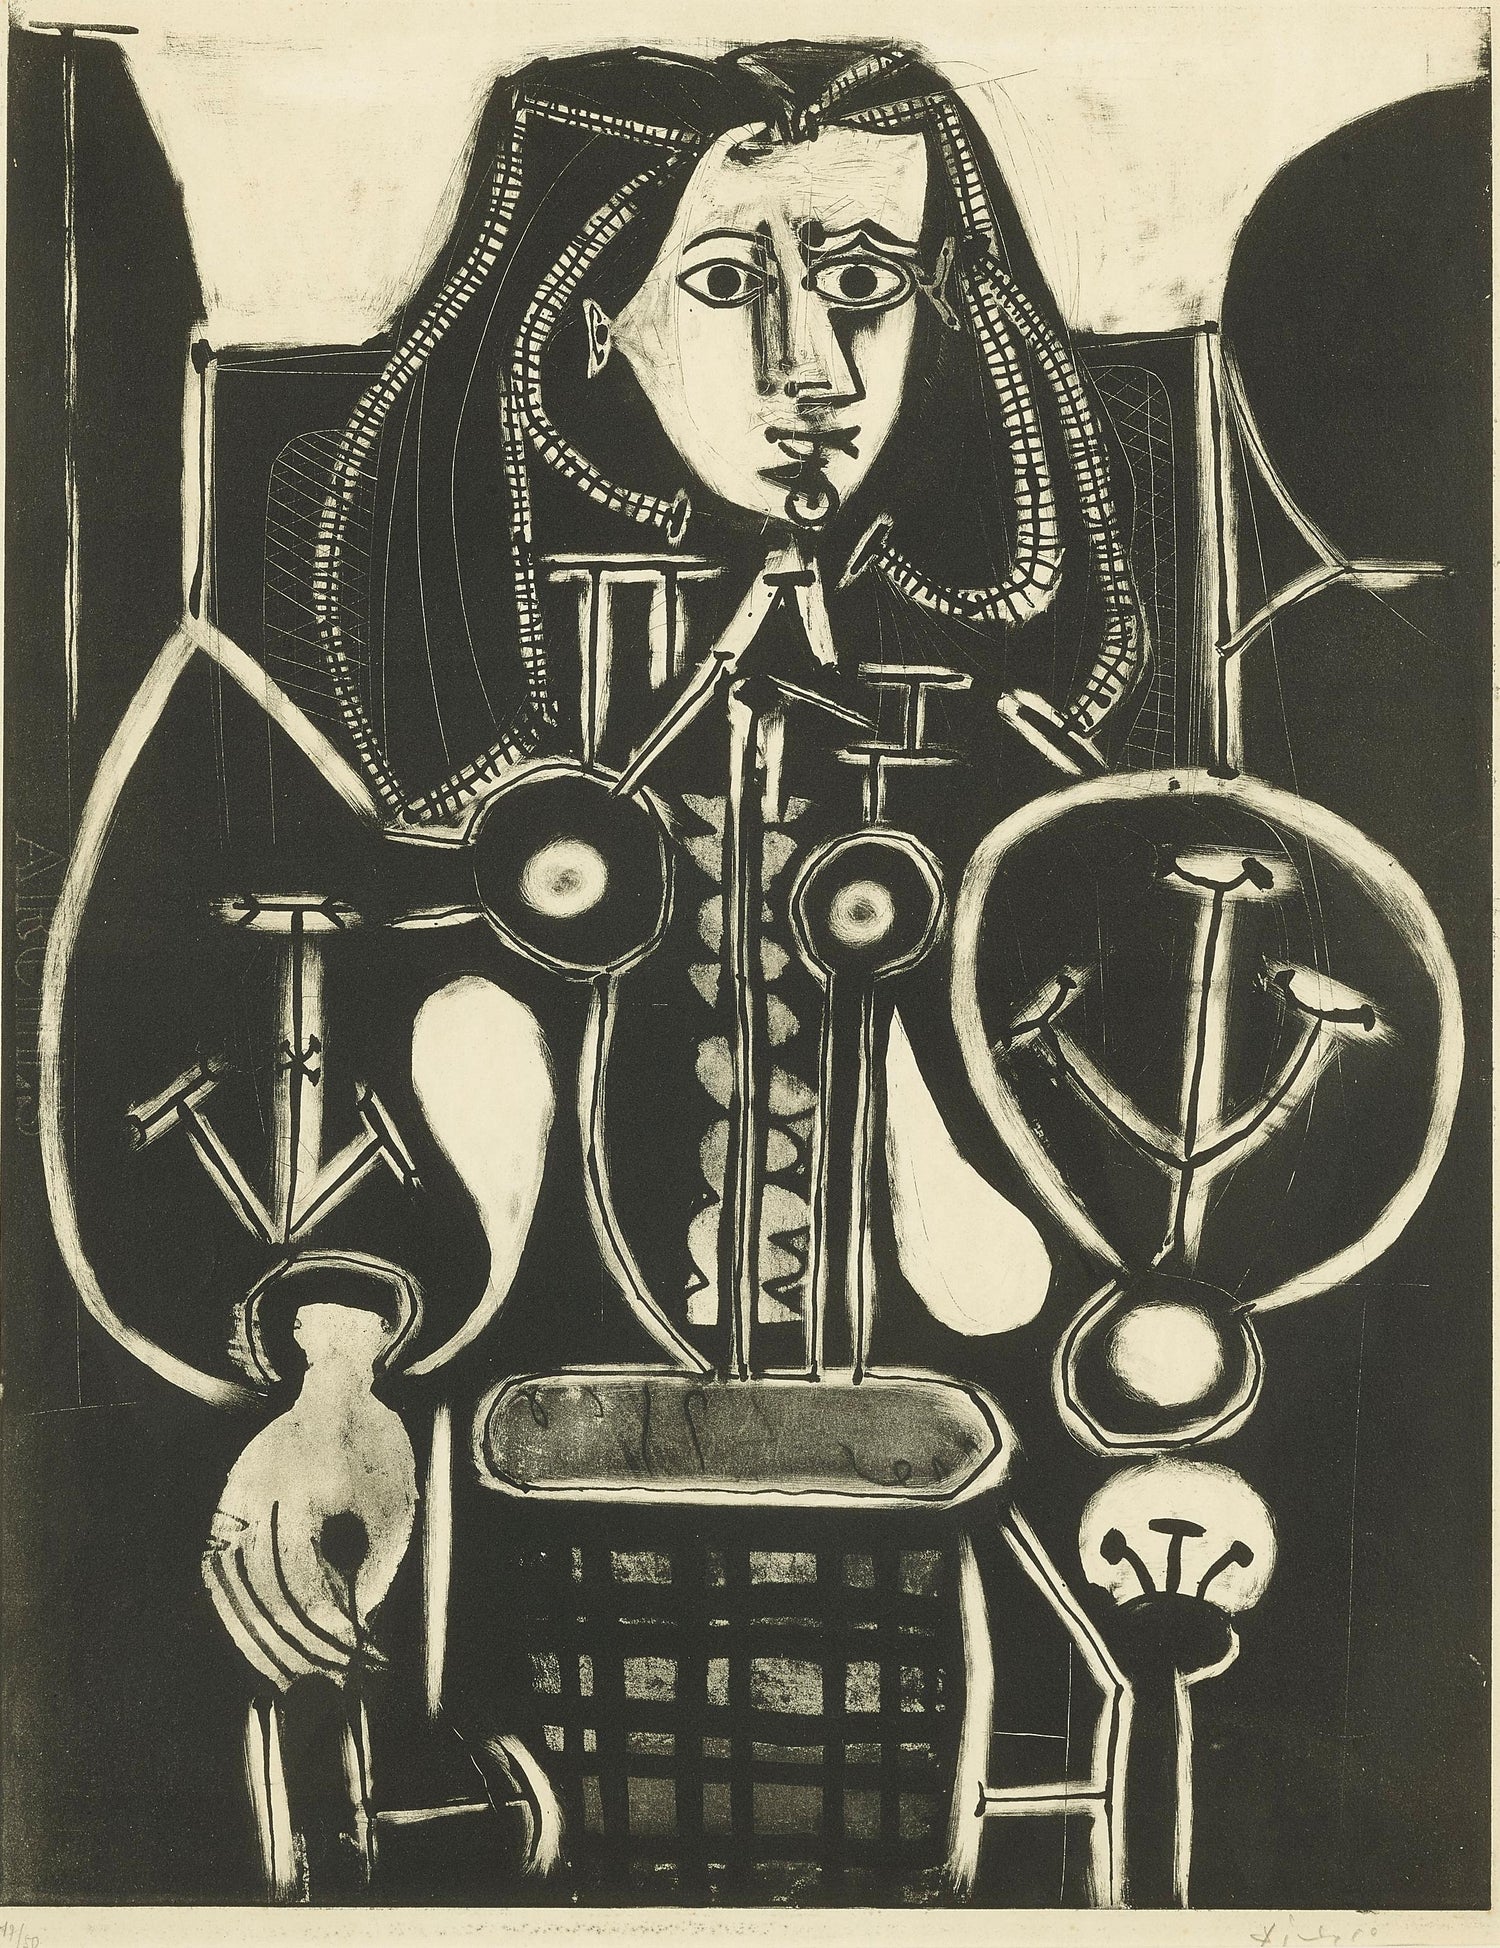 fritid Guinness Egypten Pablo Picasso - Pablo Picasso, "The Woman with a Hair Net," original  lithograph, hand signed For Sale at 1stDibs